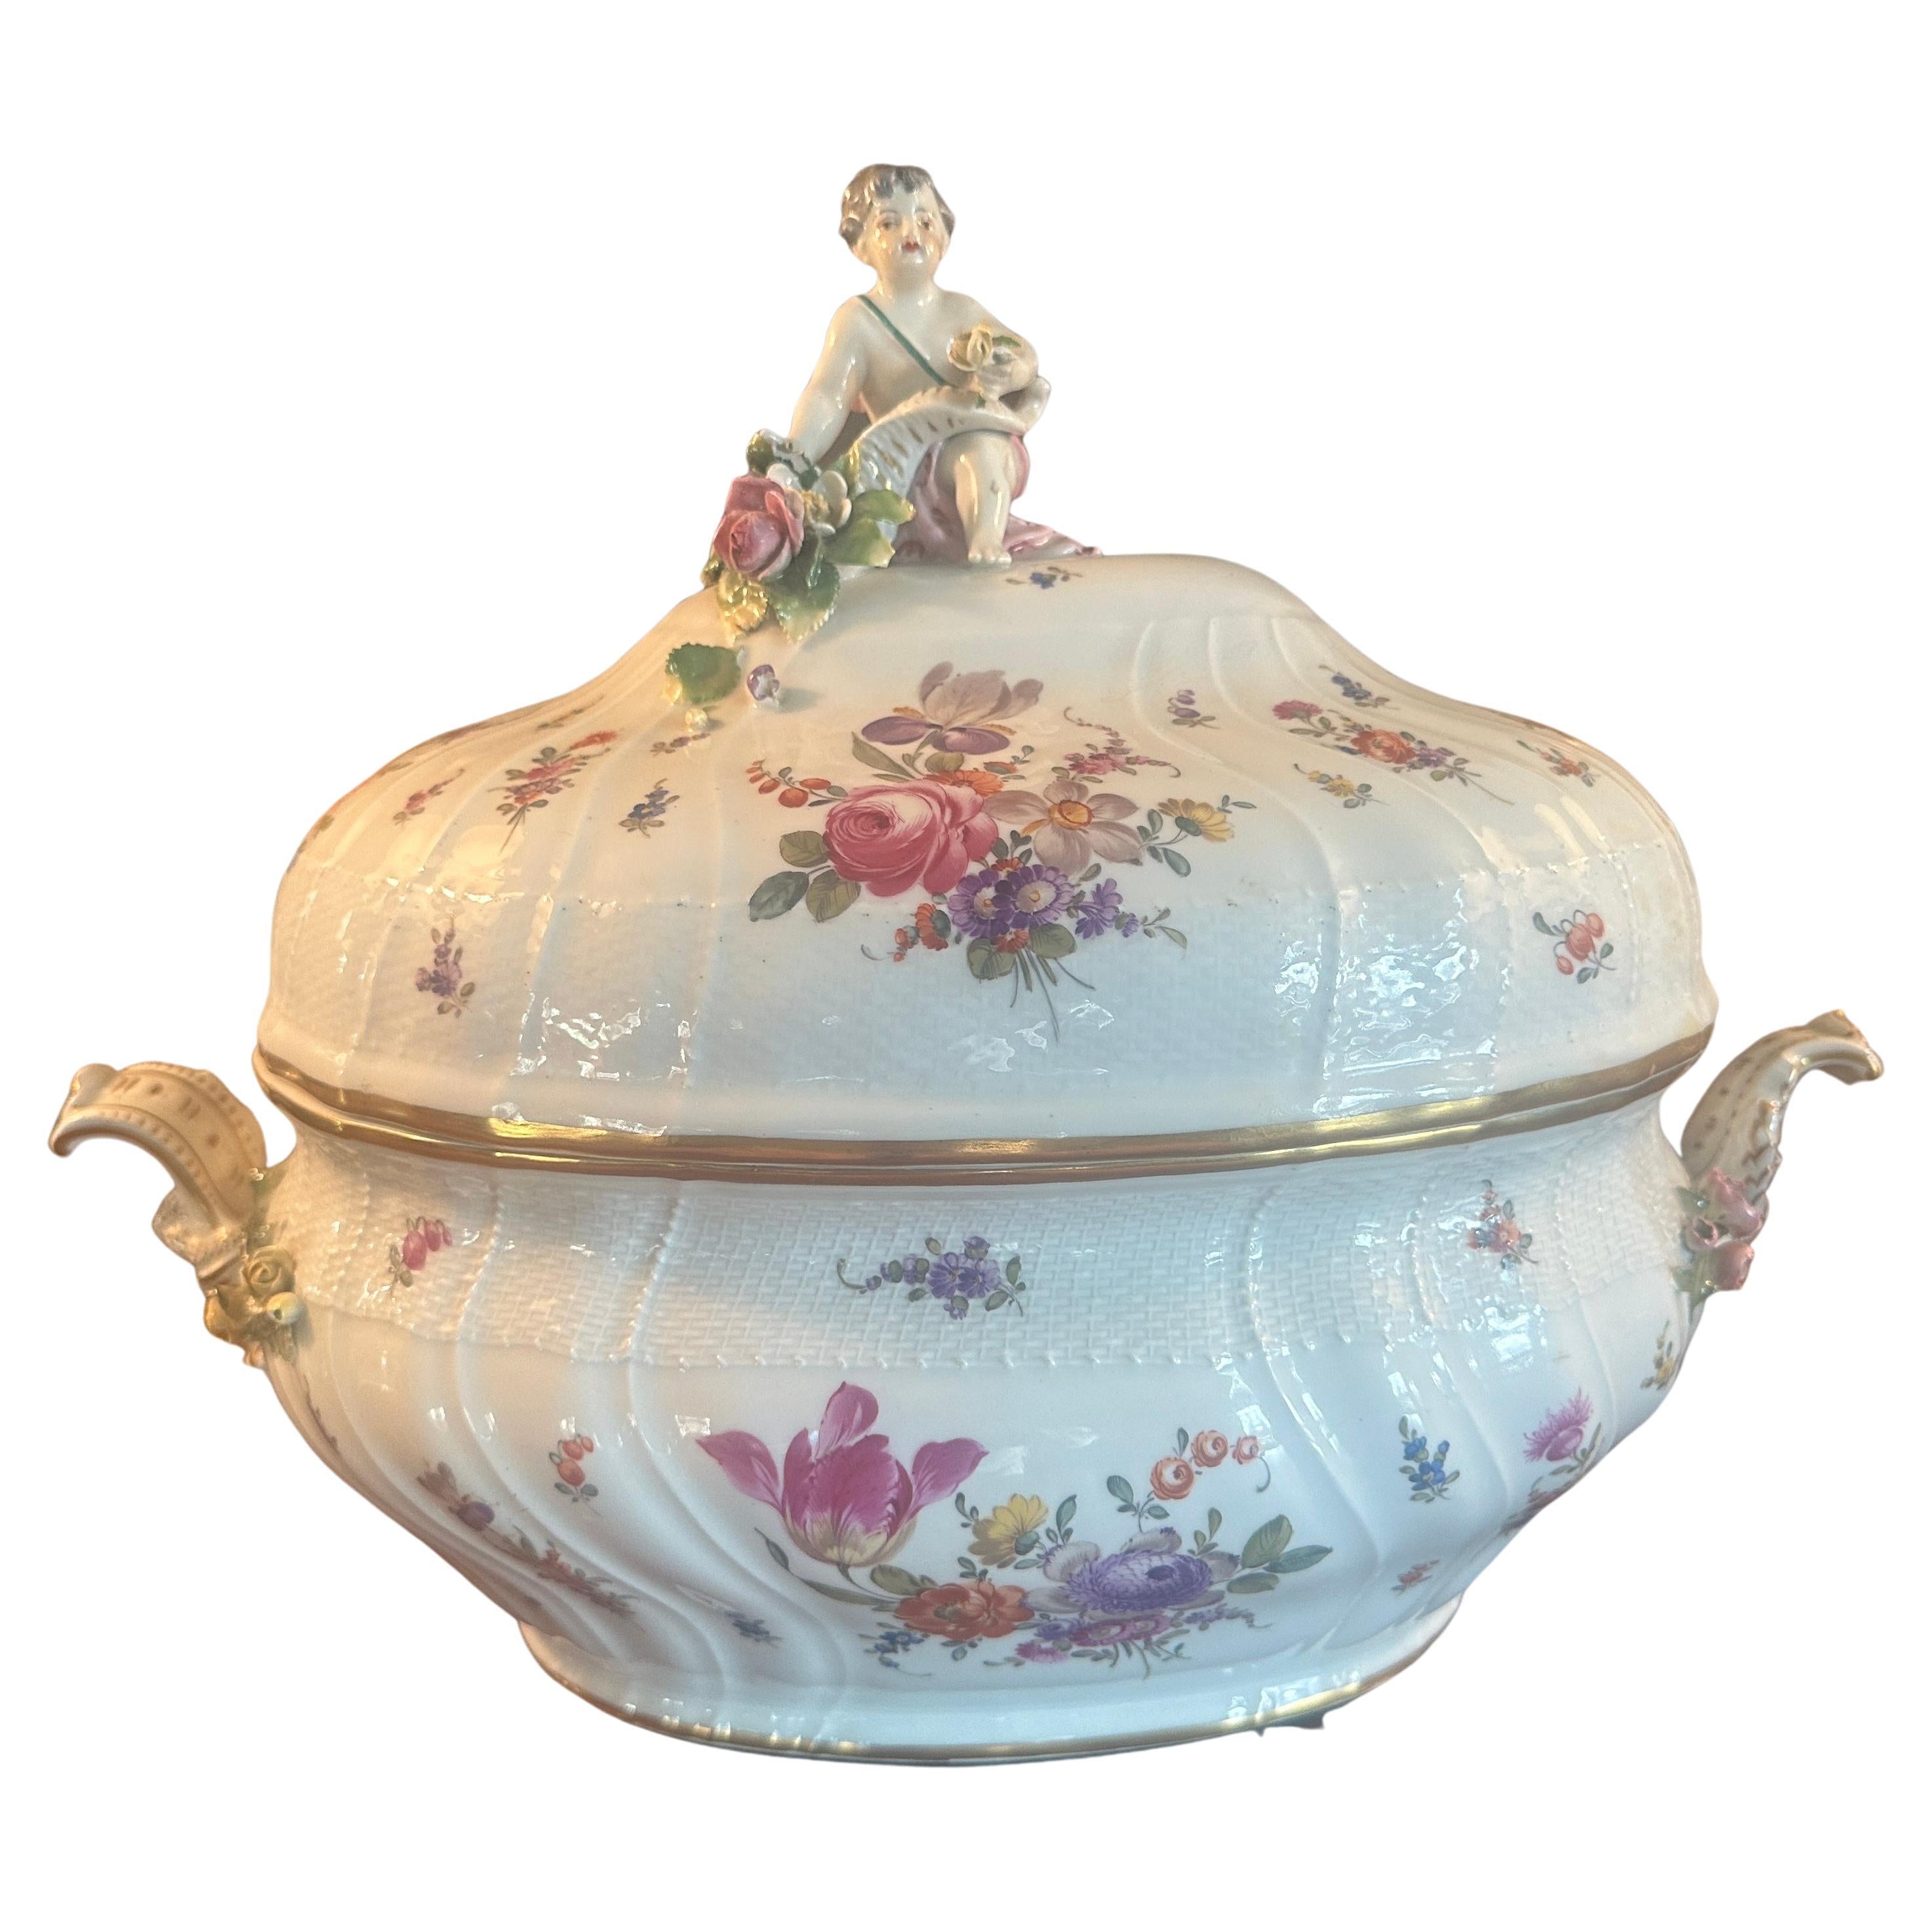 Berlin Porcelain Tureen, by KPM, Beautifully Decorated For Sale